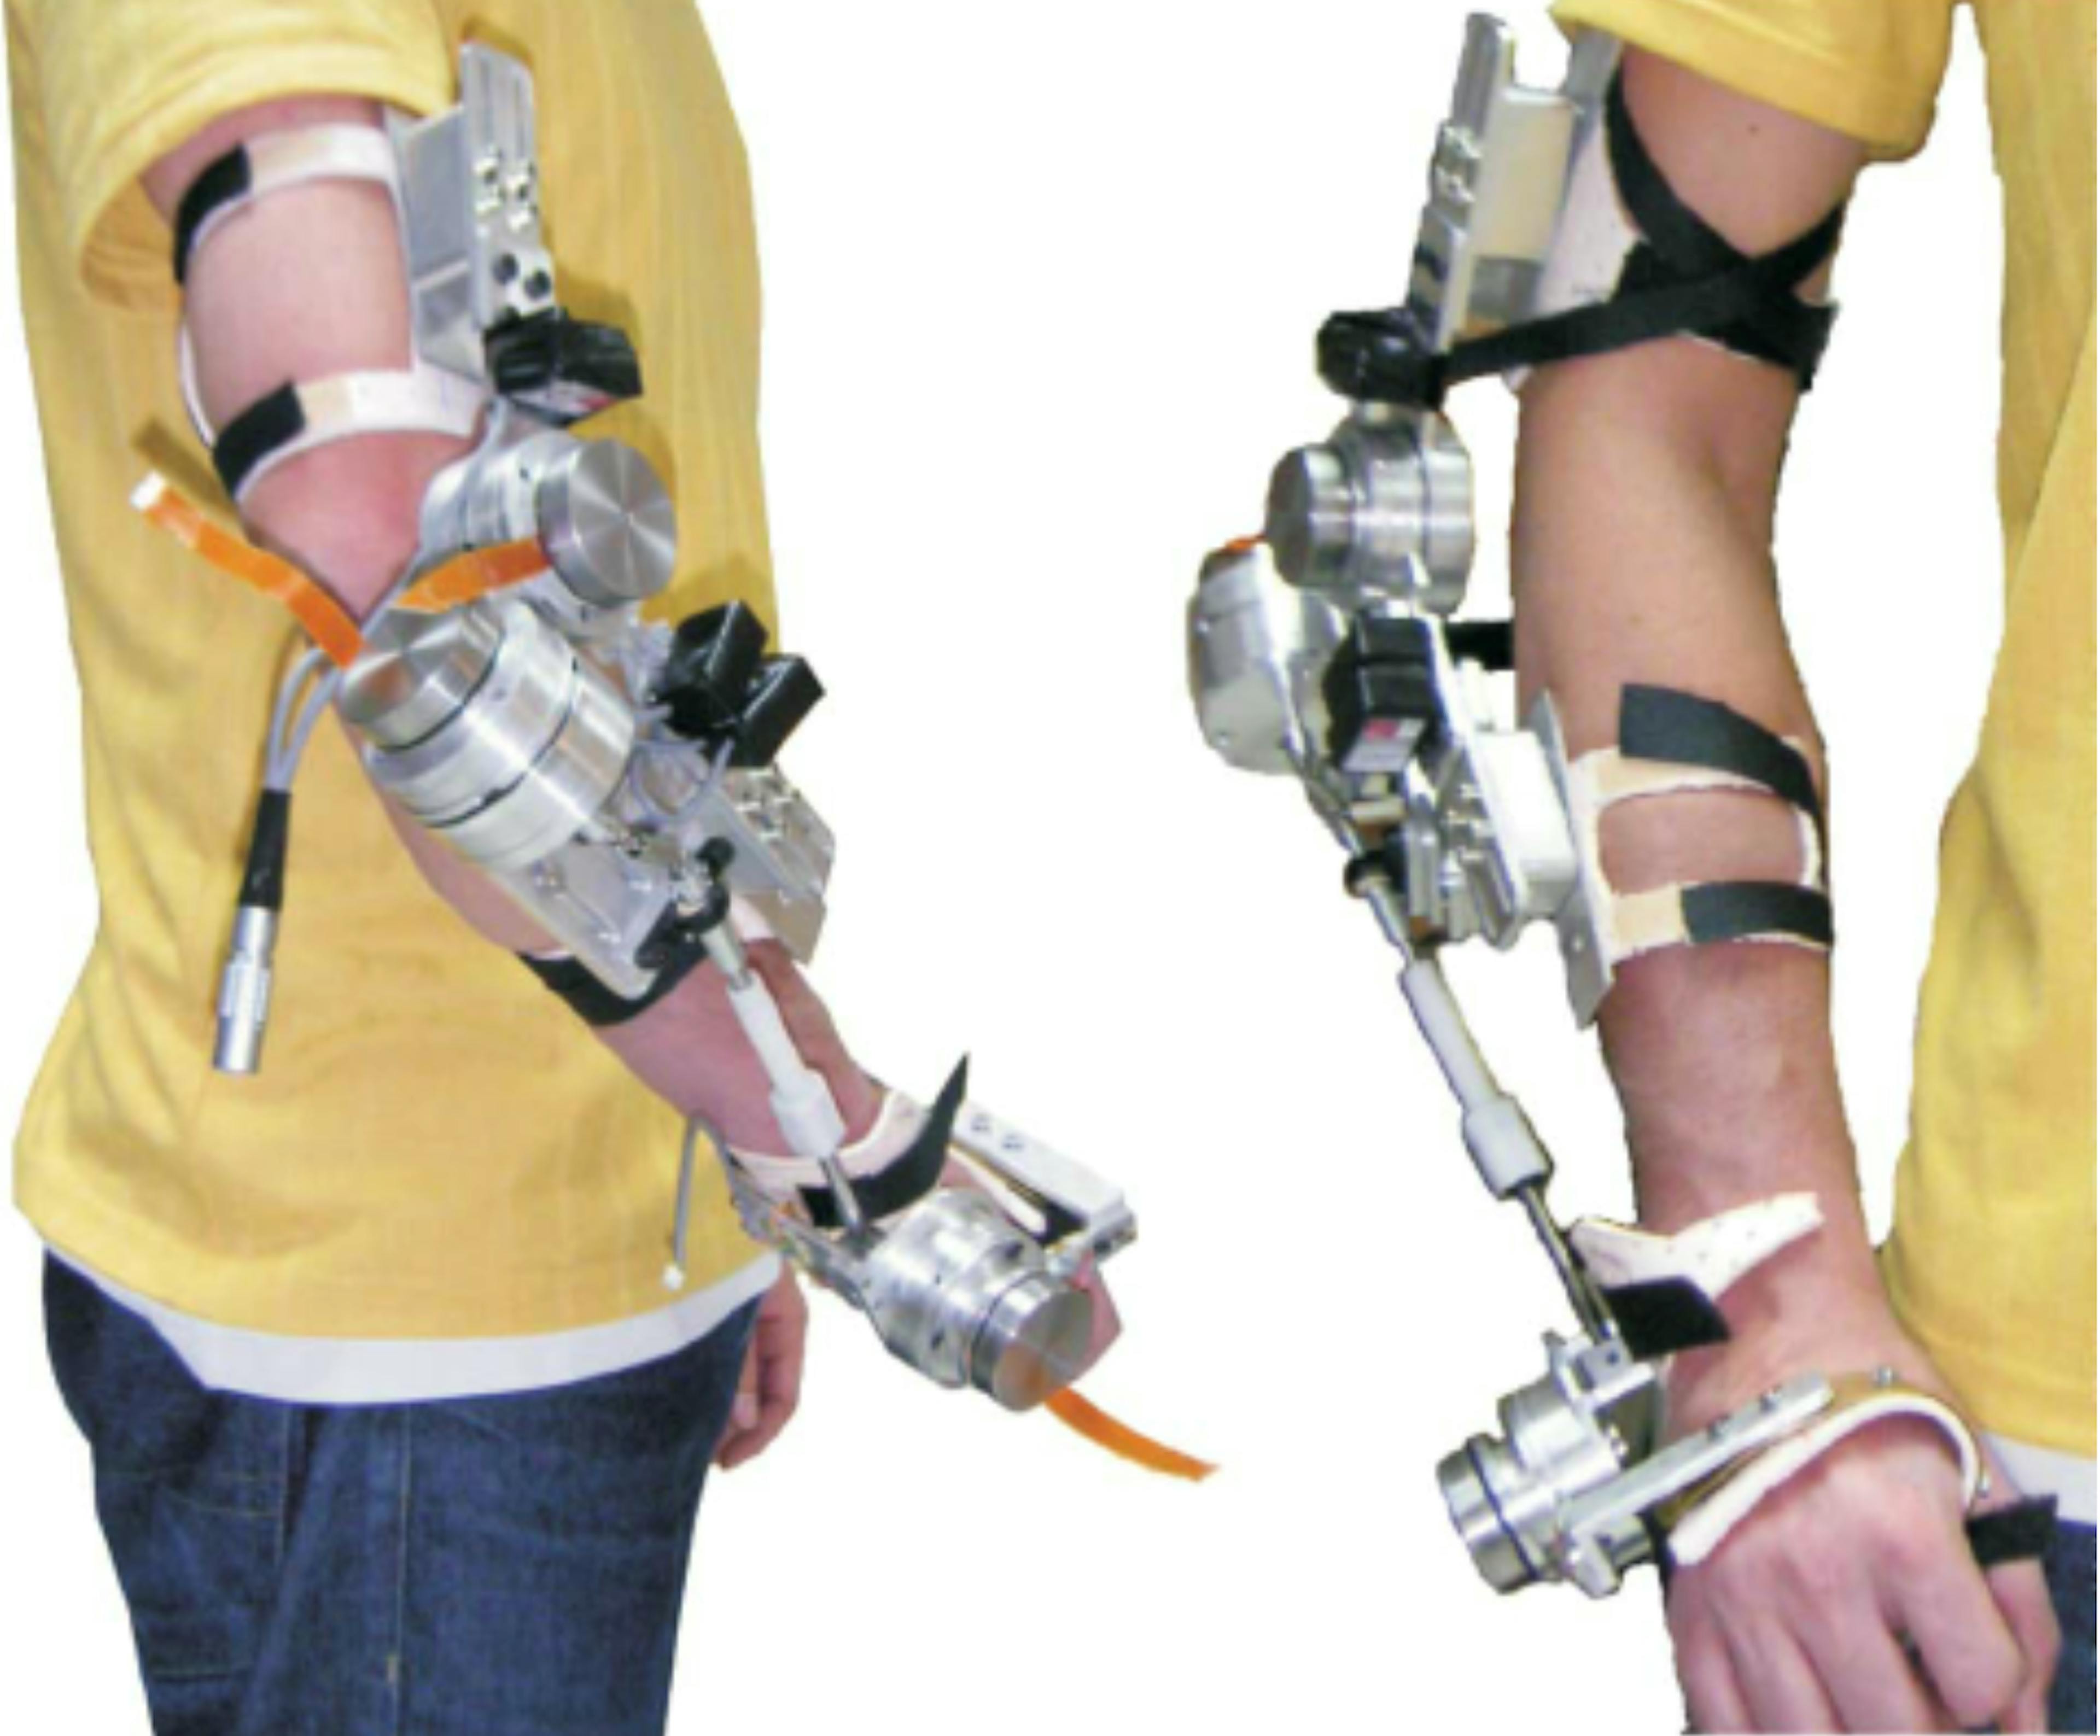 The final version of the WOTAS concept Source: ResearchGate (https://www.researchgate.net/figure/Final-version-of-WOTAS-for-the-control-of-three-human-upper-limb-movements-fl-exion_fig2_5950945)